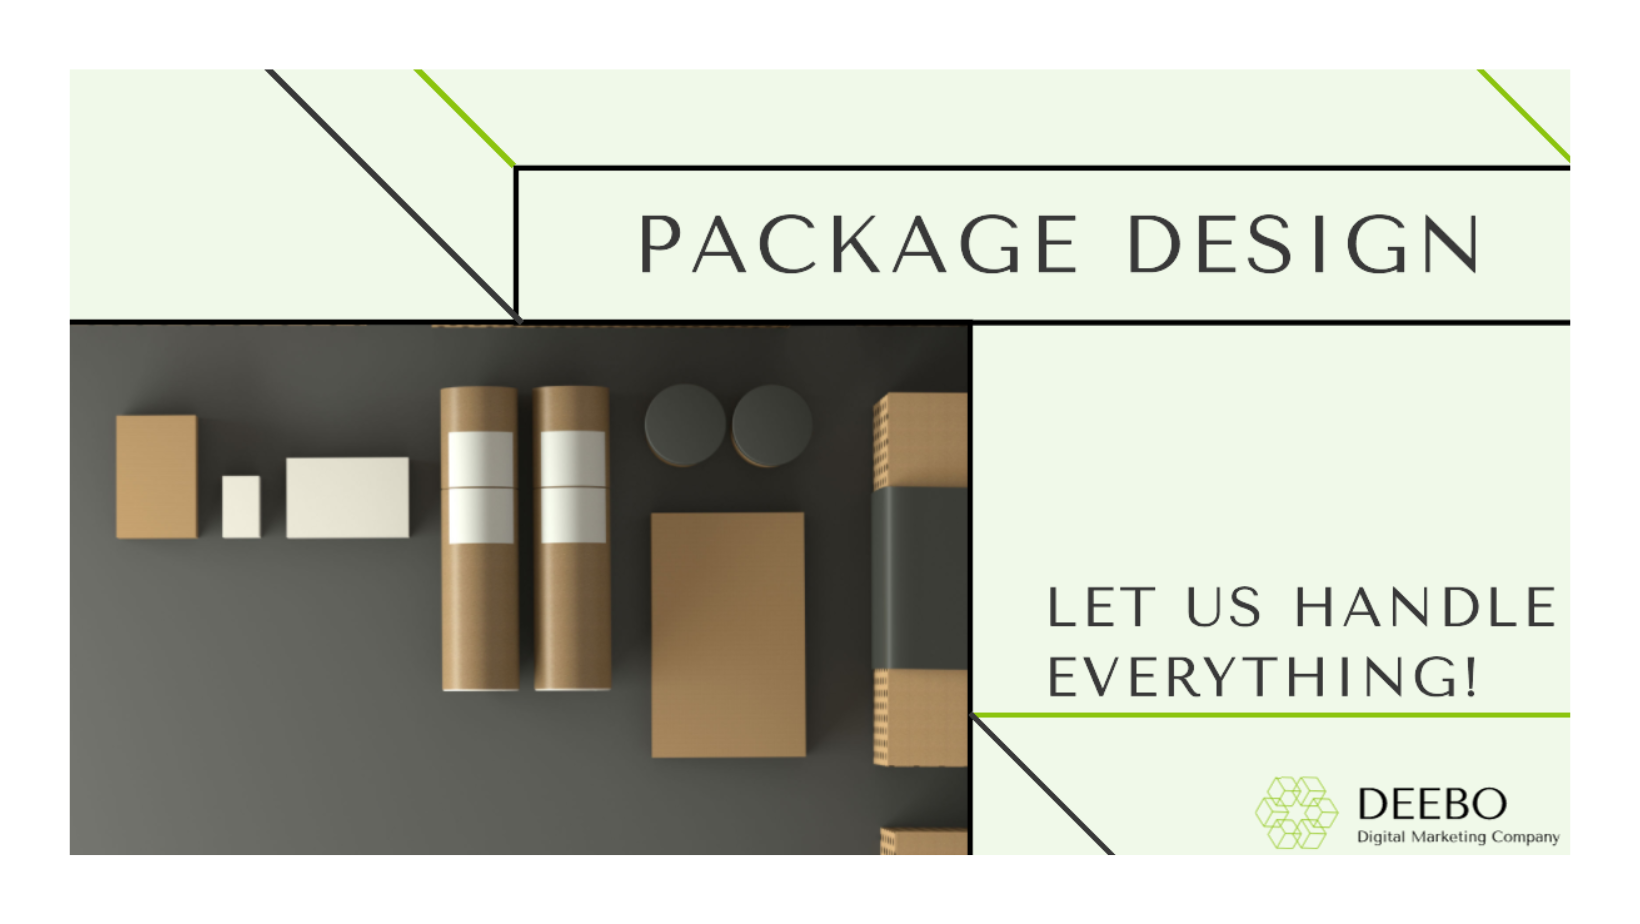 Package design for your product with Deebo